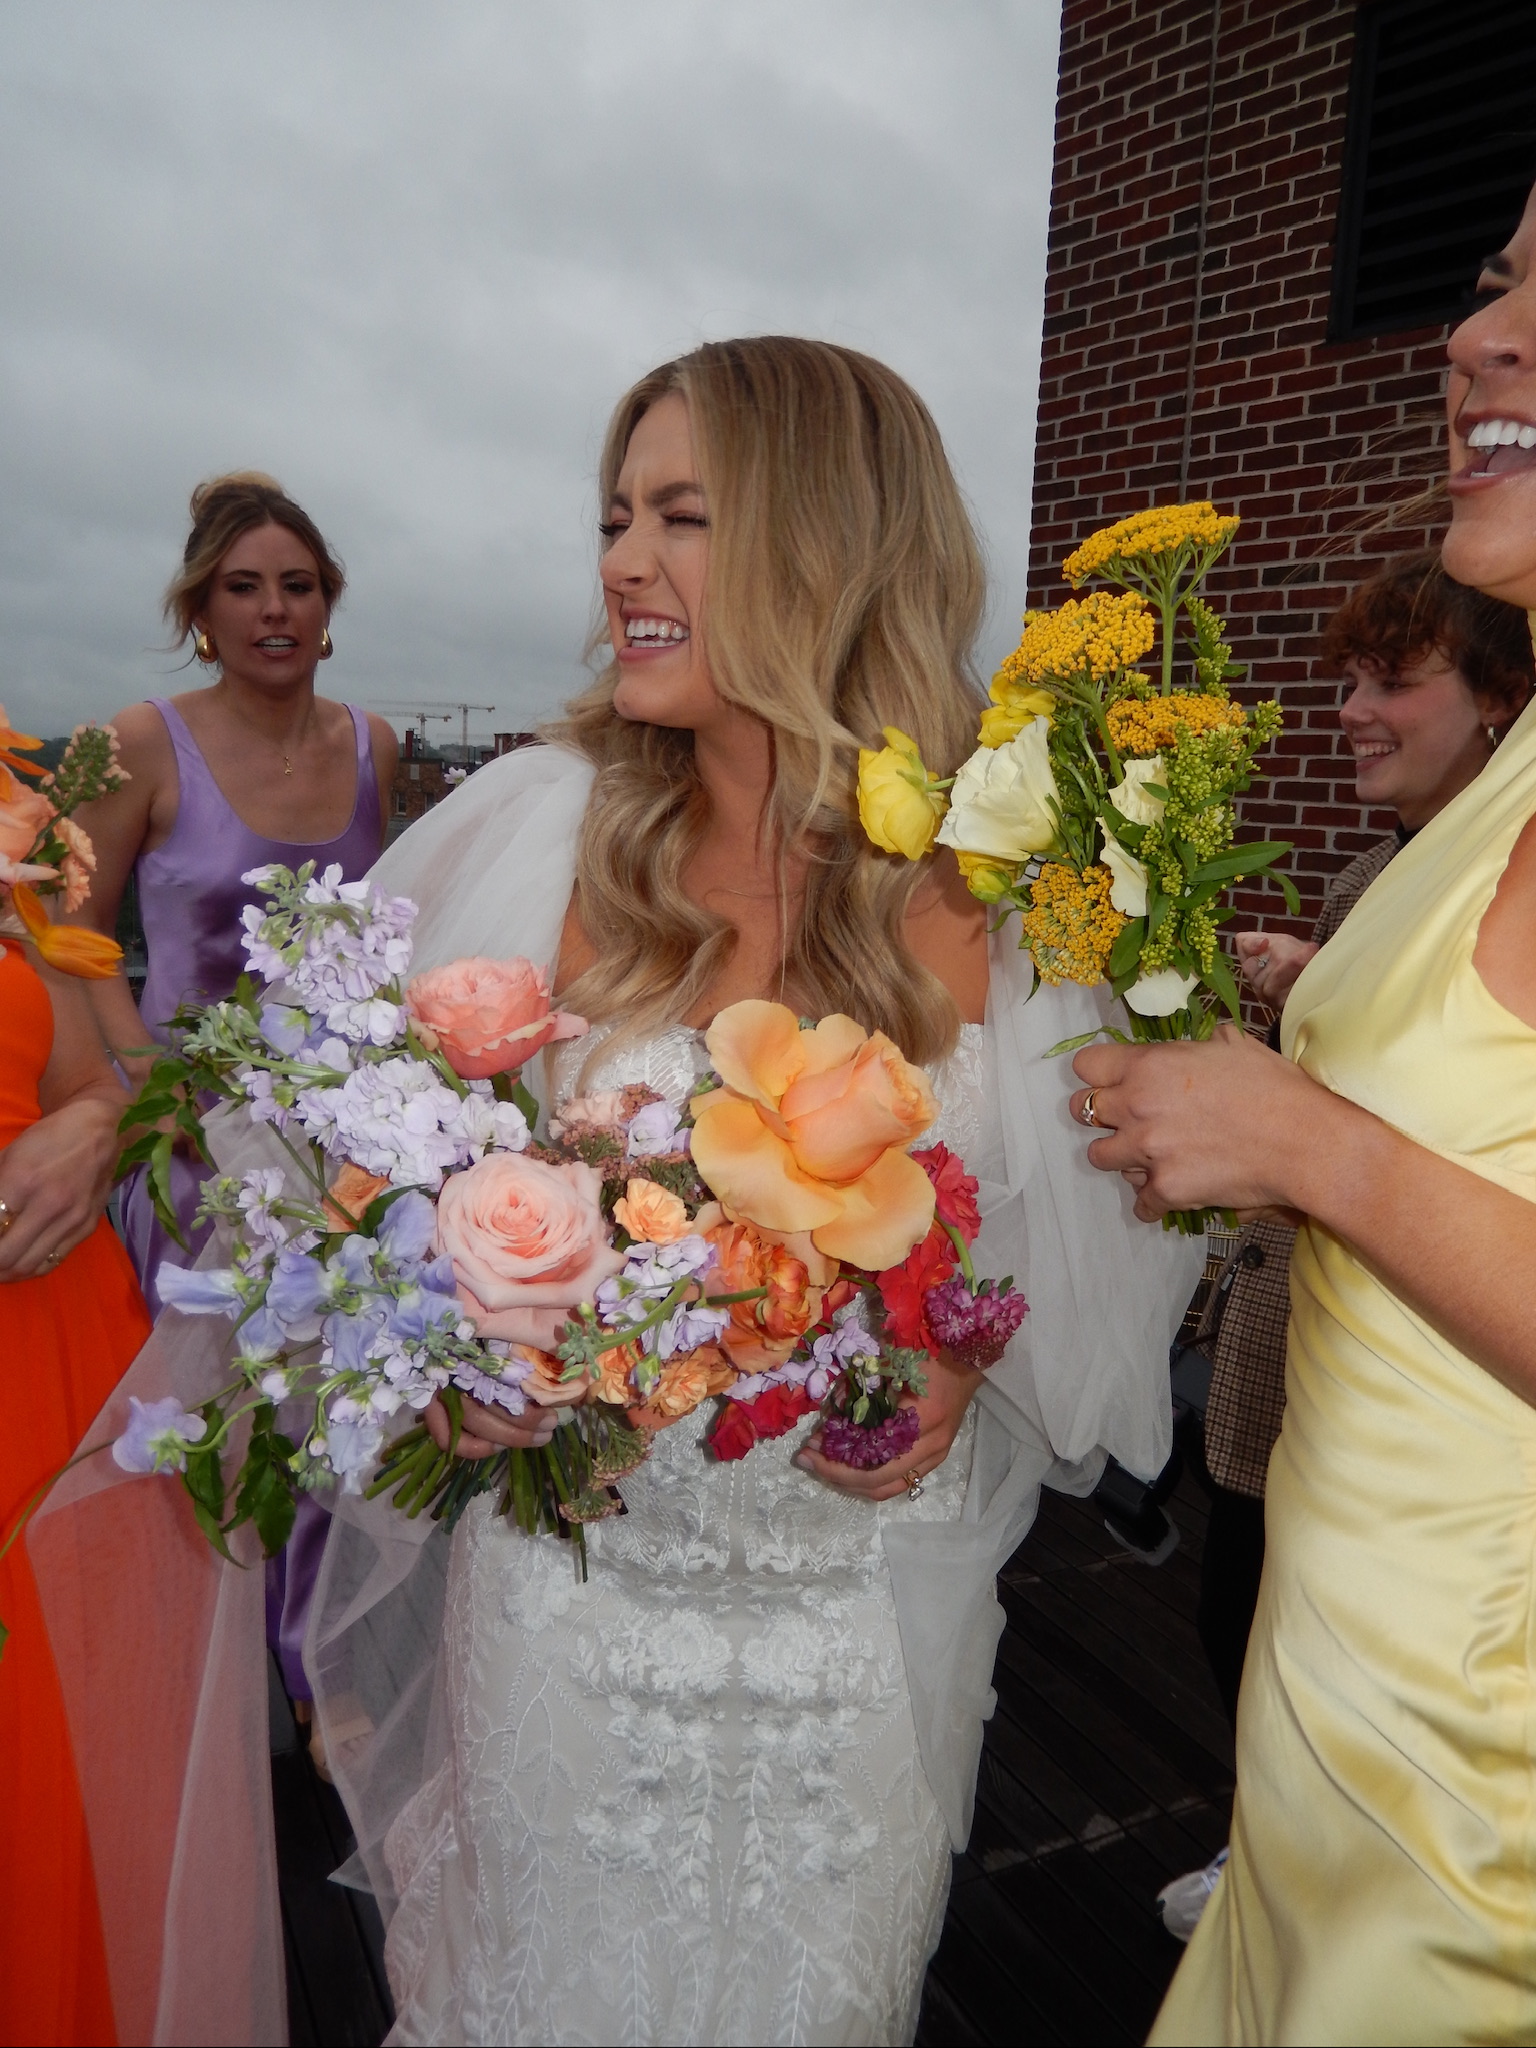 Bride laughing with bridesmaids wearing colorful dresses and carrying florals